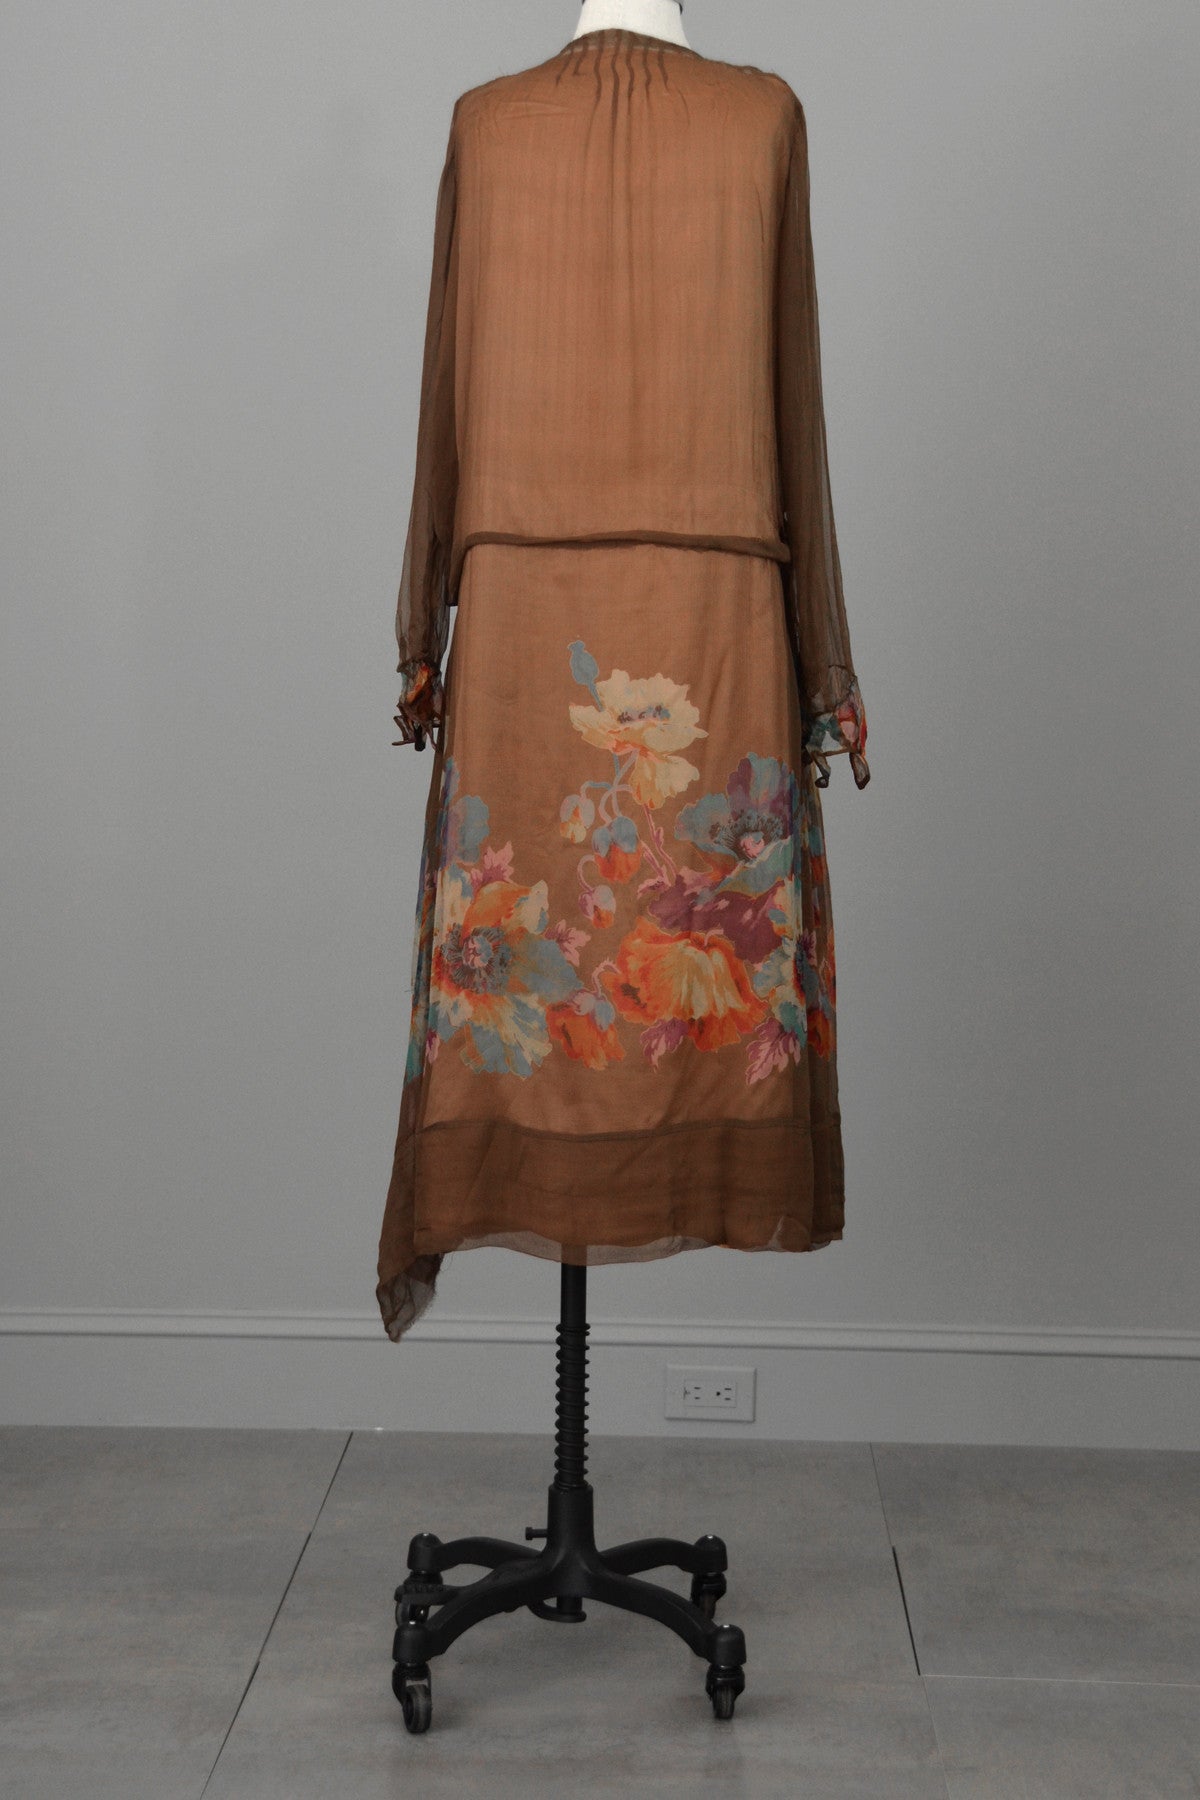 1920s Mocha Chiffon and Lace Vintage Flapper Dress with Vibrant Floral Print